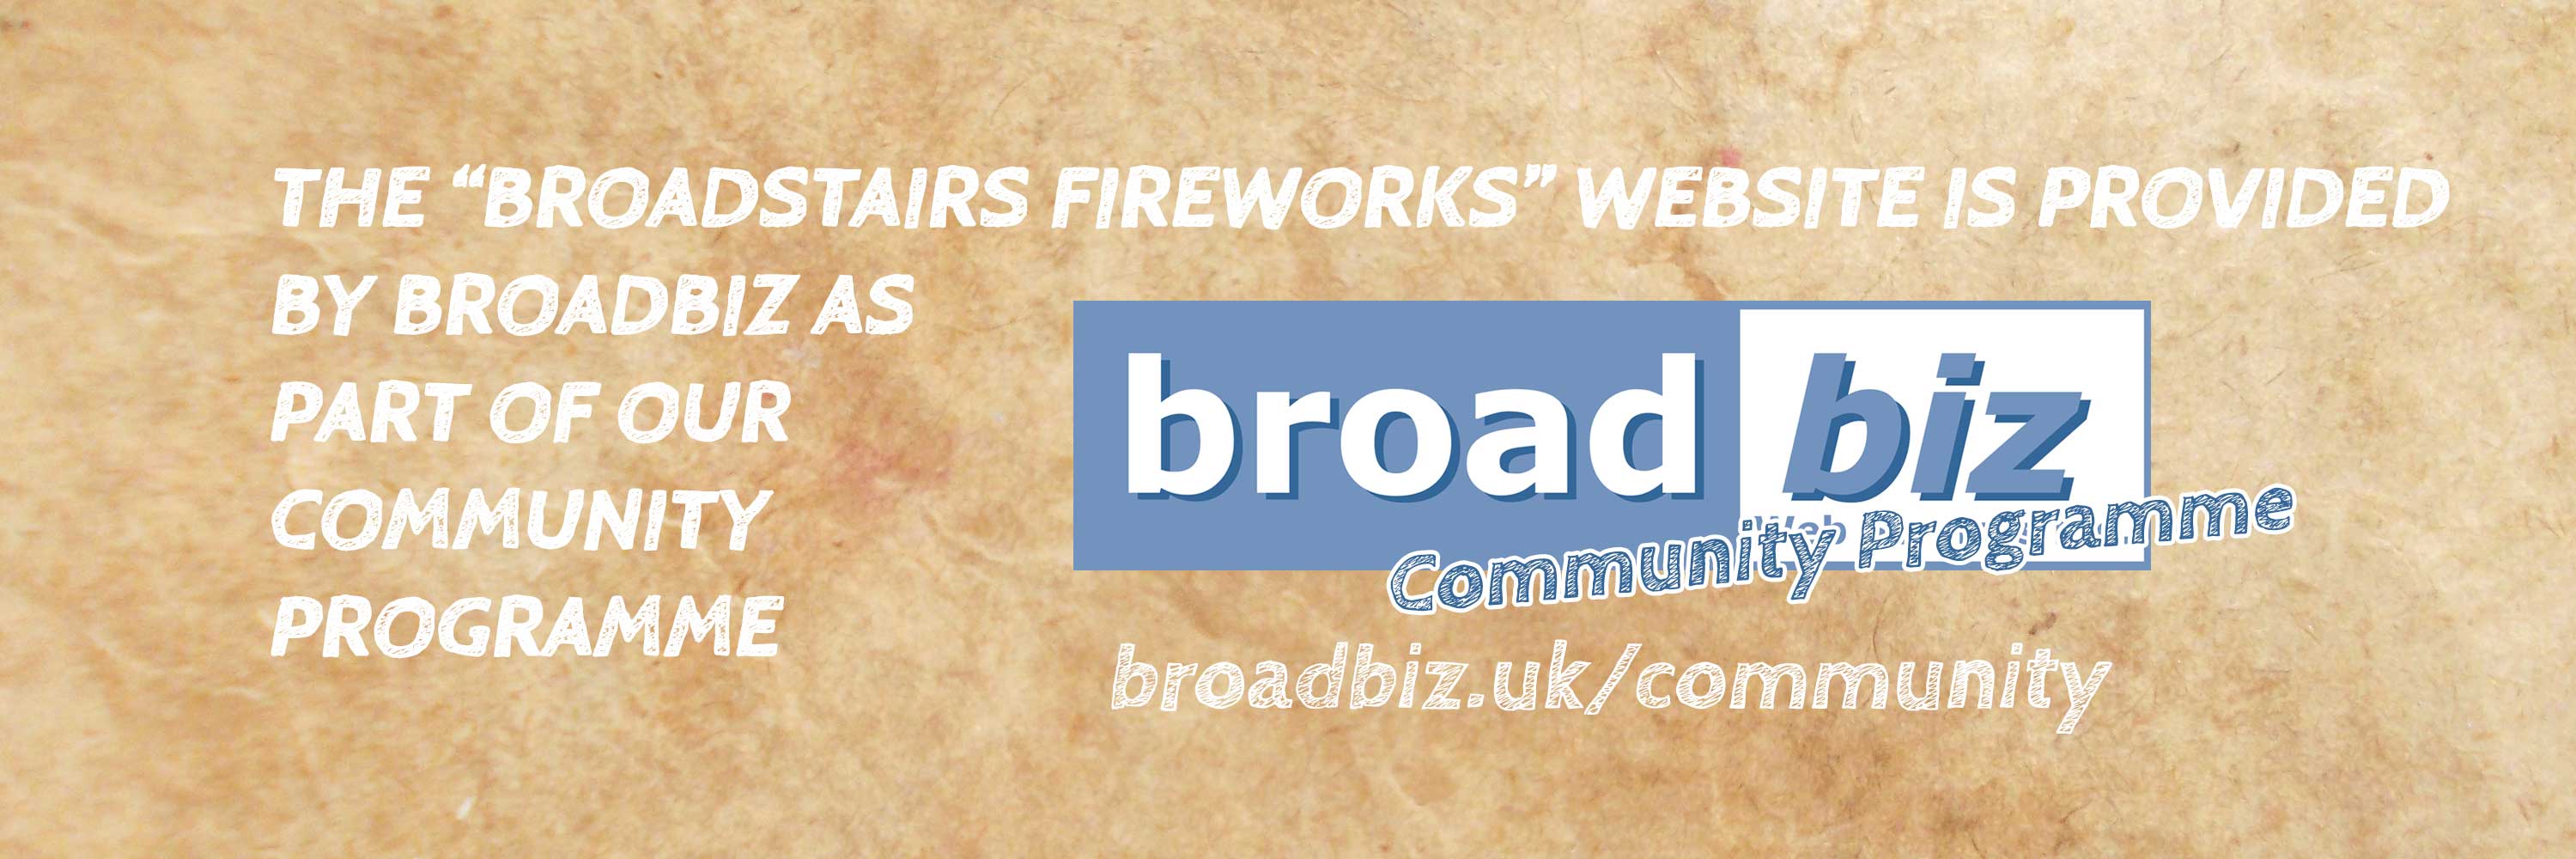 The Broadstairs Fireworks website is provided by Broadbiz as part of our Community Programme